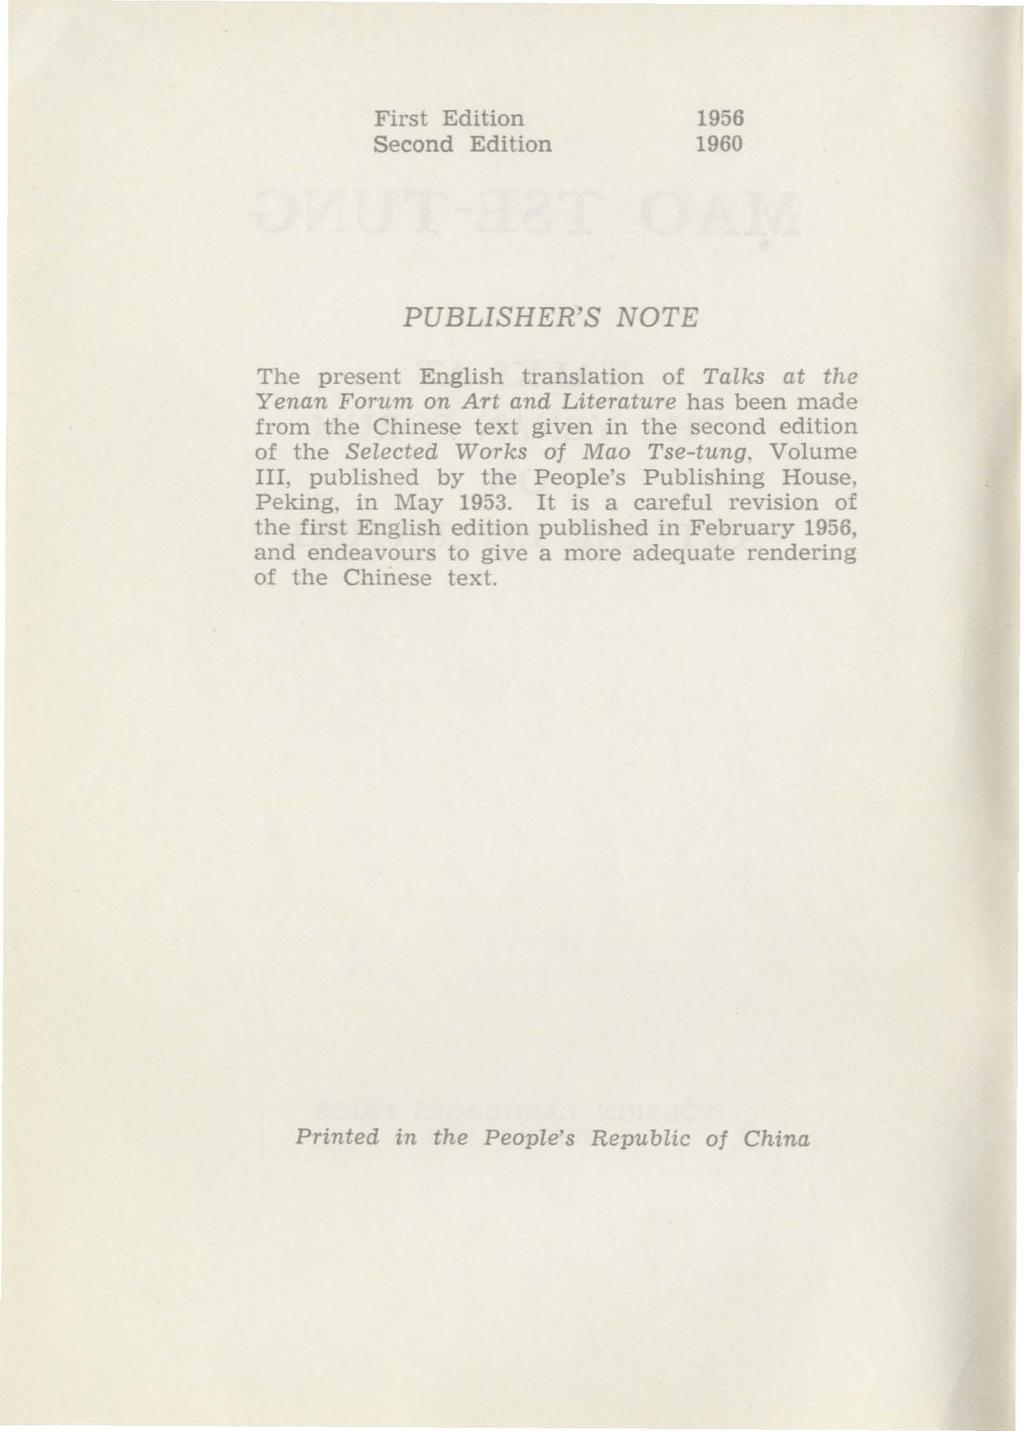 First Edition Second Edition 1956 1960 PUBLISHER'S NOTE The present English translation of Talks at the Yenan Forum on Art and Literature has been made from the Chinese text given in the second